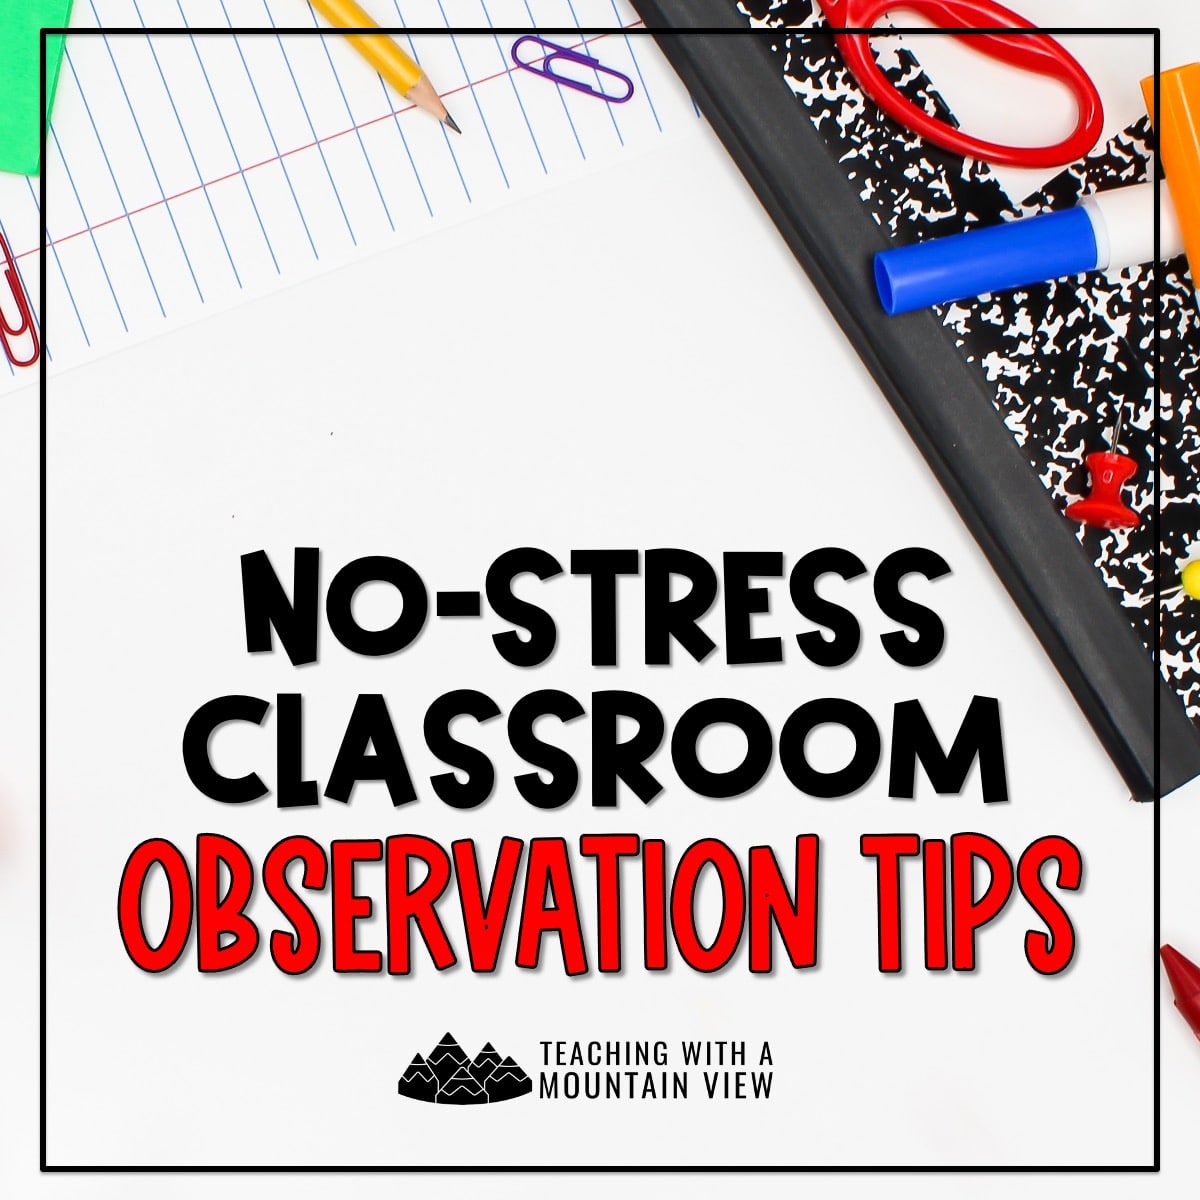 Whether you’re preparing for a scheduled observation or want to ace an unannounced walkthrough, this list of classroom observation tips will help!